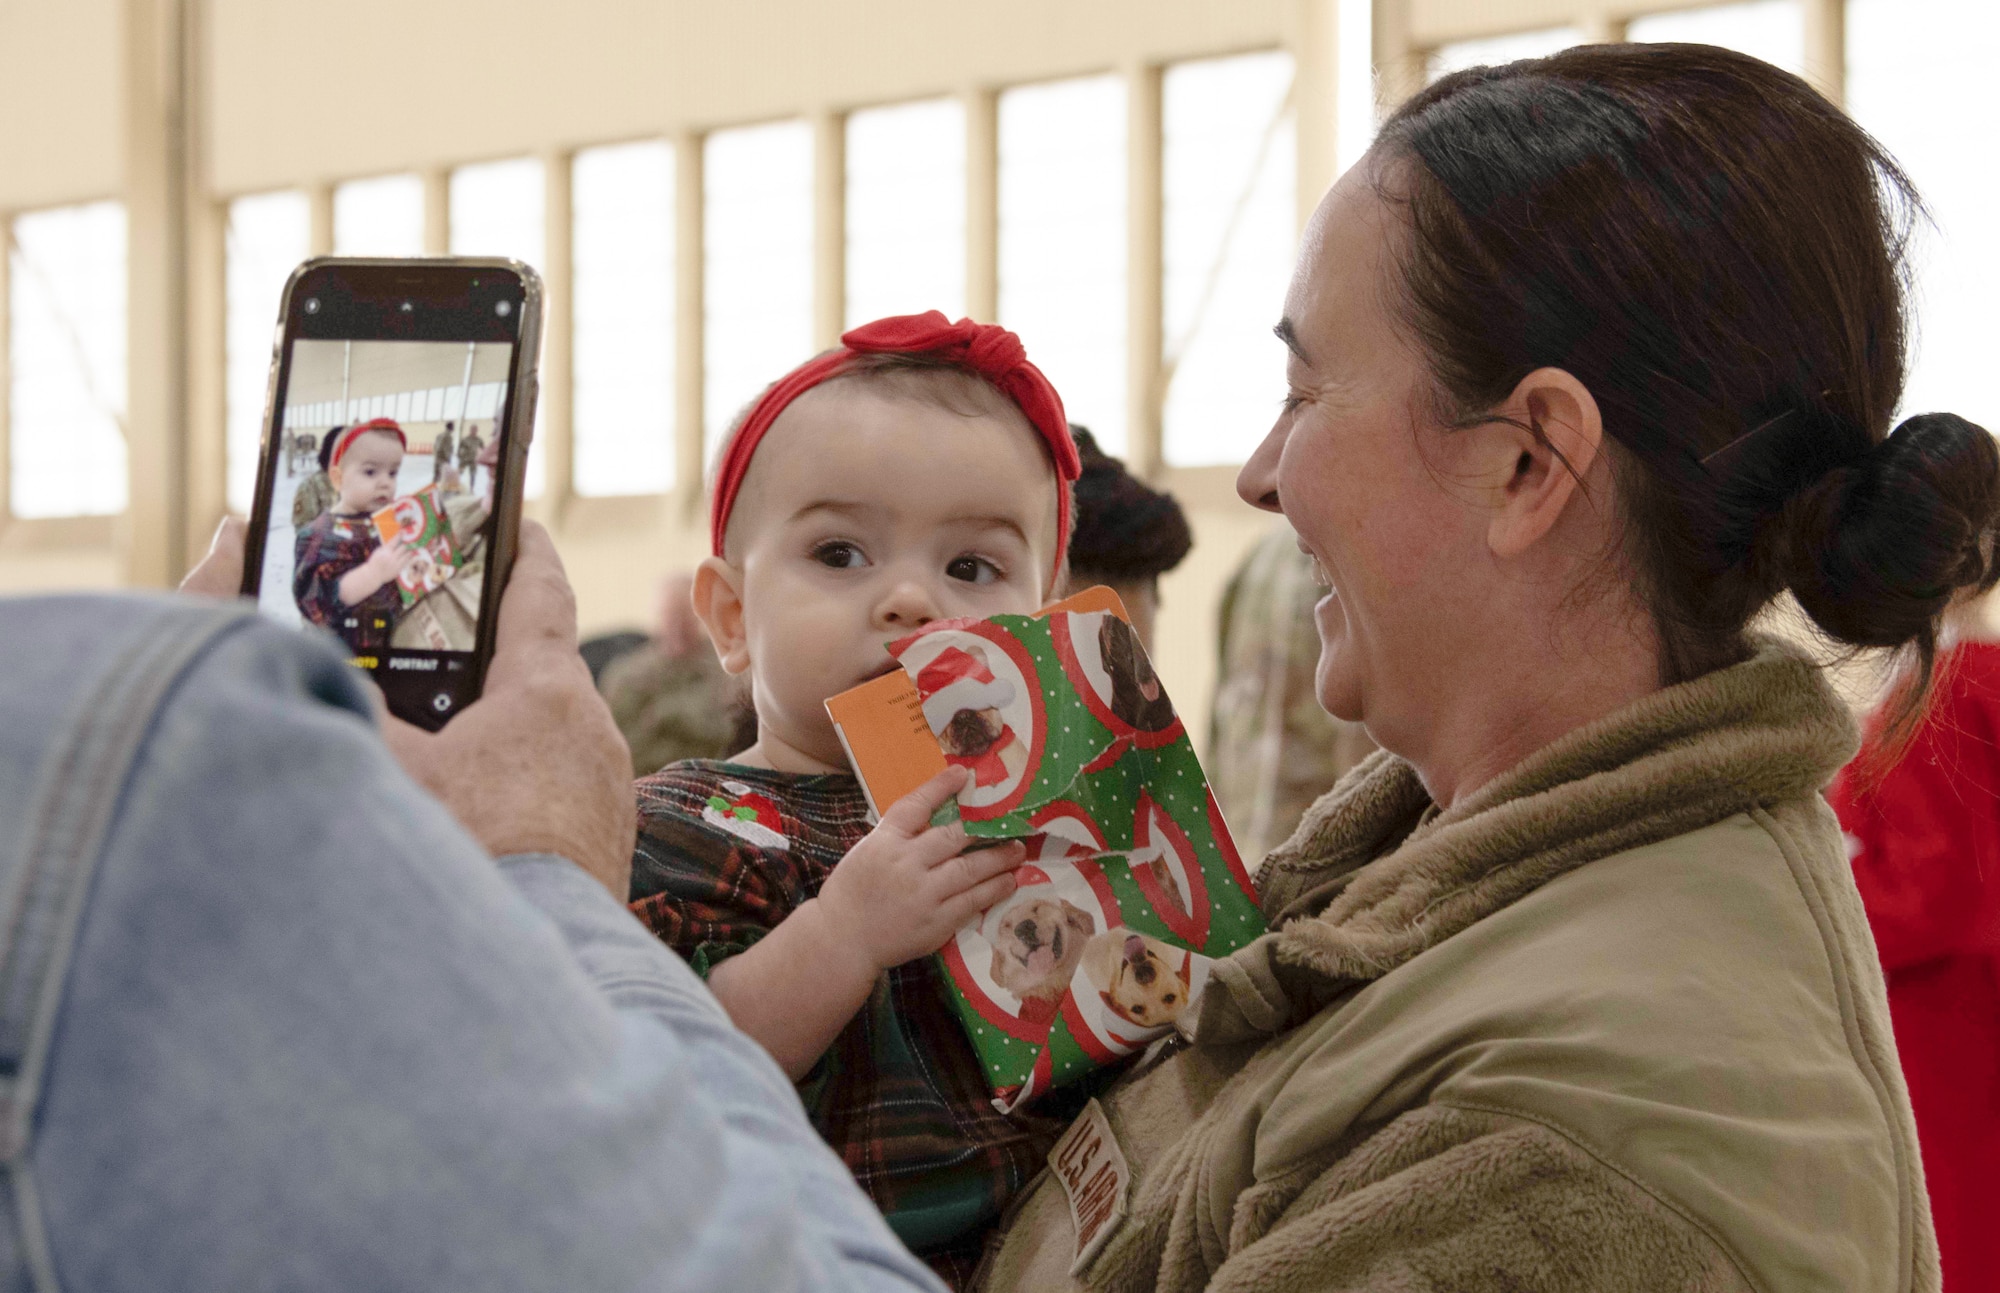 This is a photo of a US AFRC traditional Reservists holding a young child and smiling at them while their photo is being taken on a cellular device.